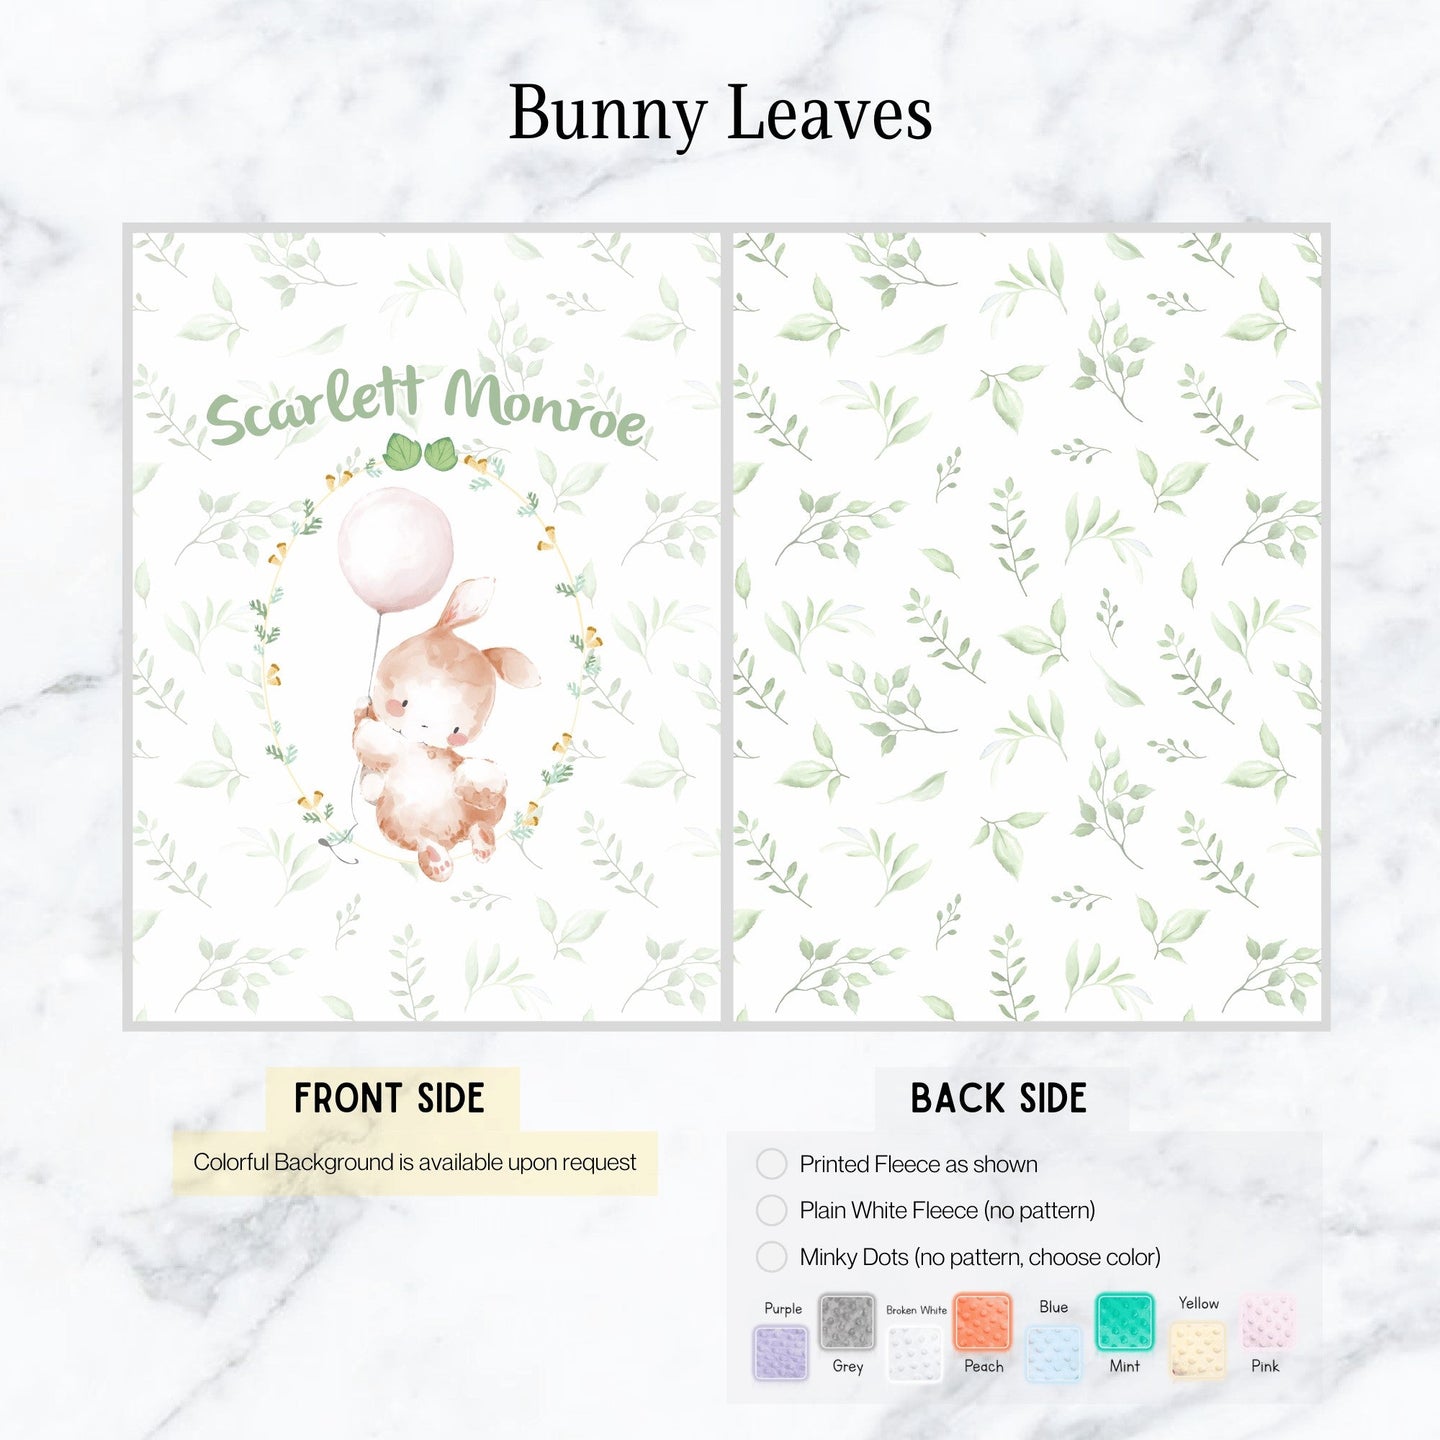 Bunny Leaves